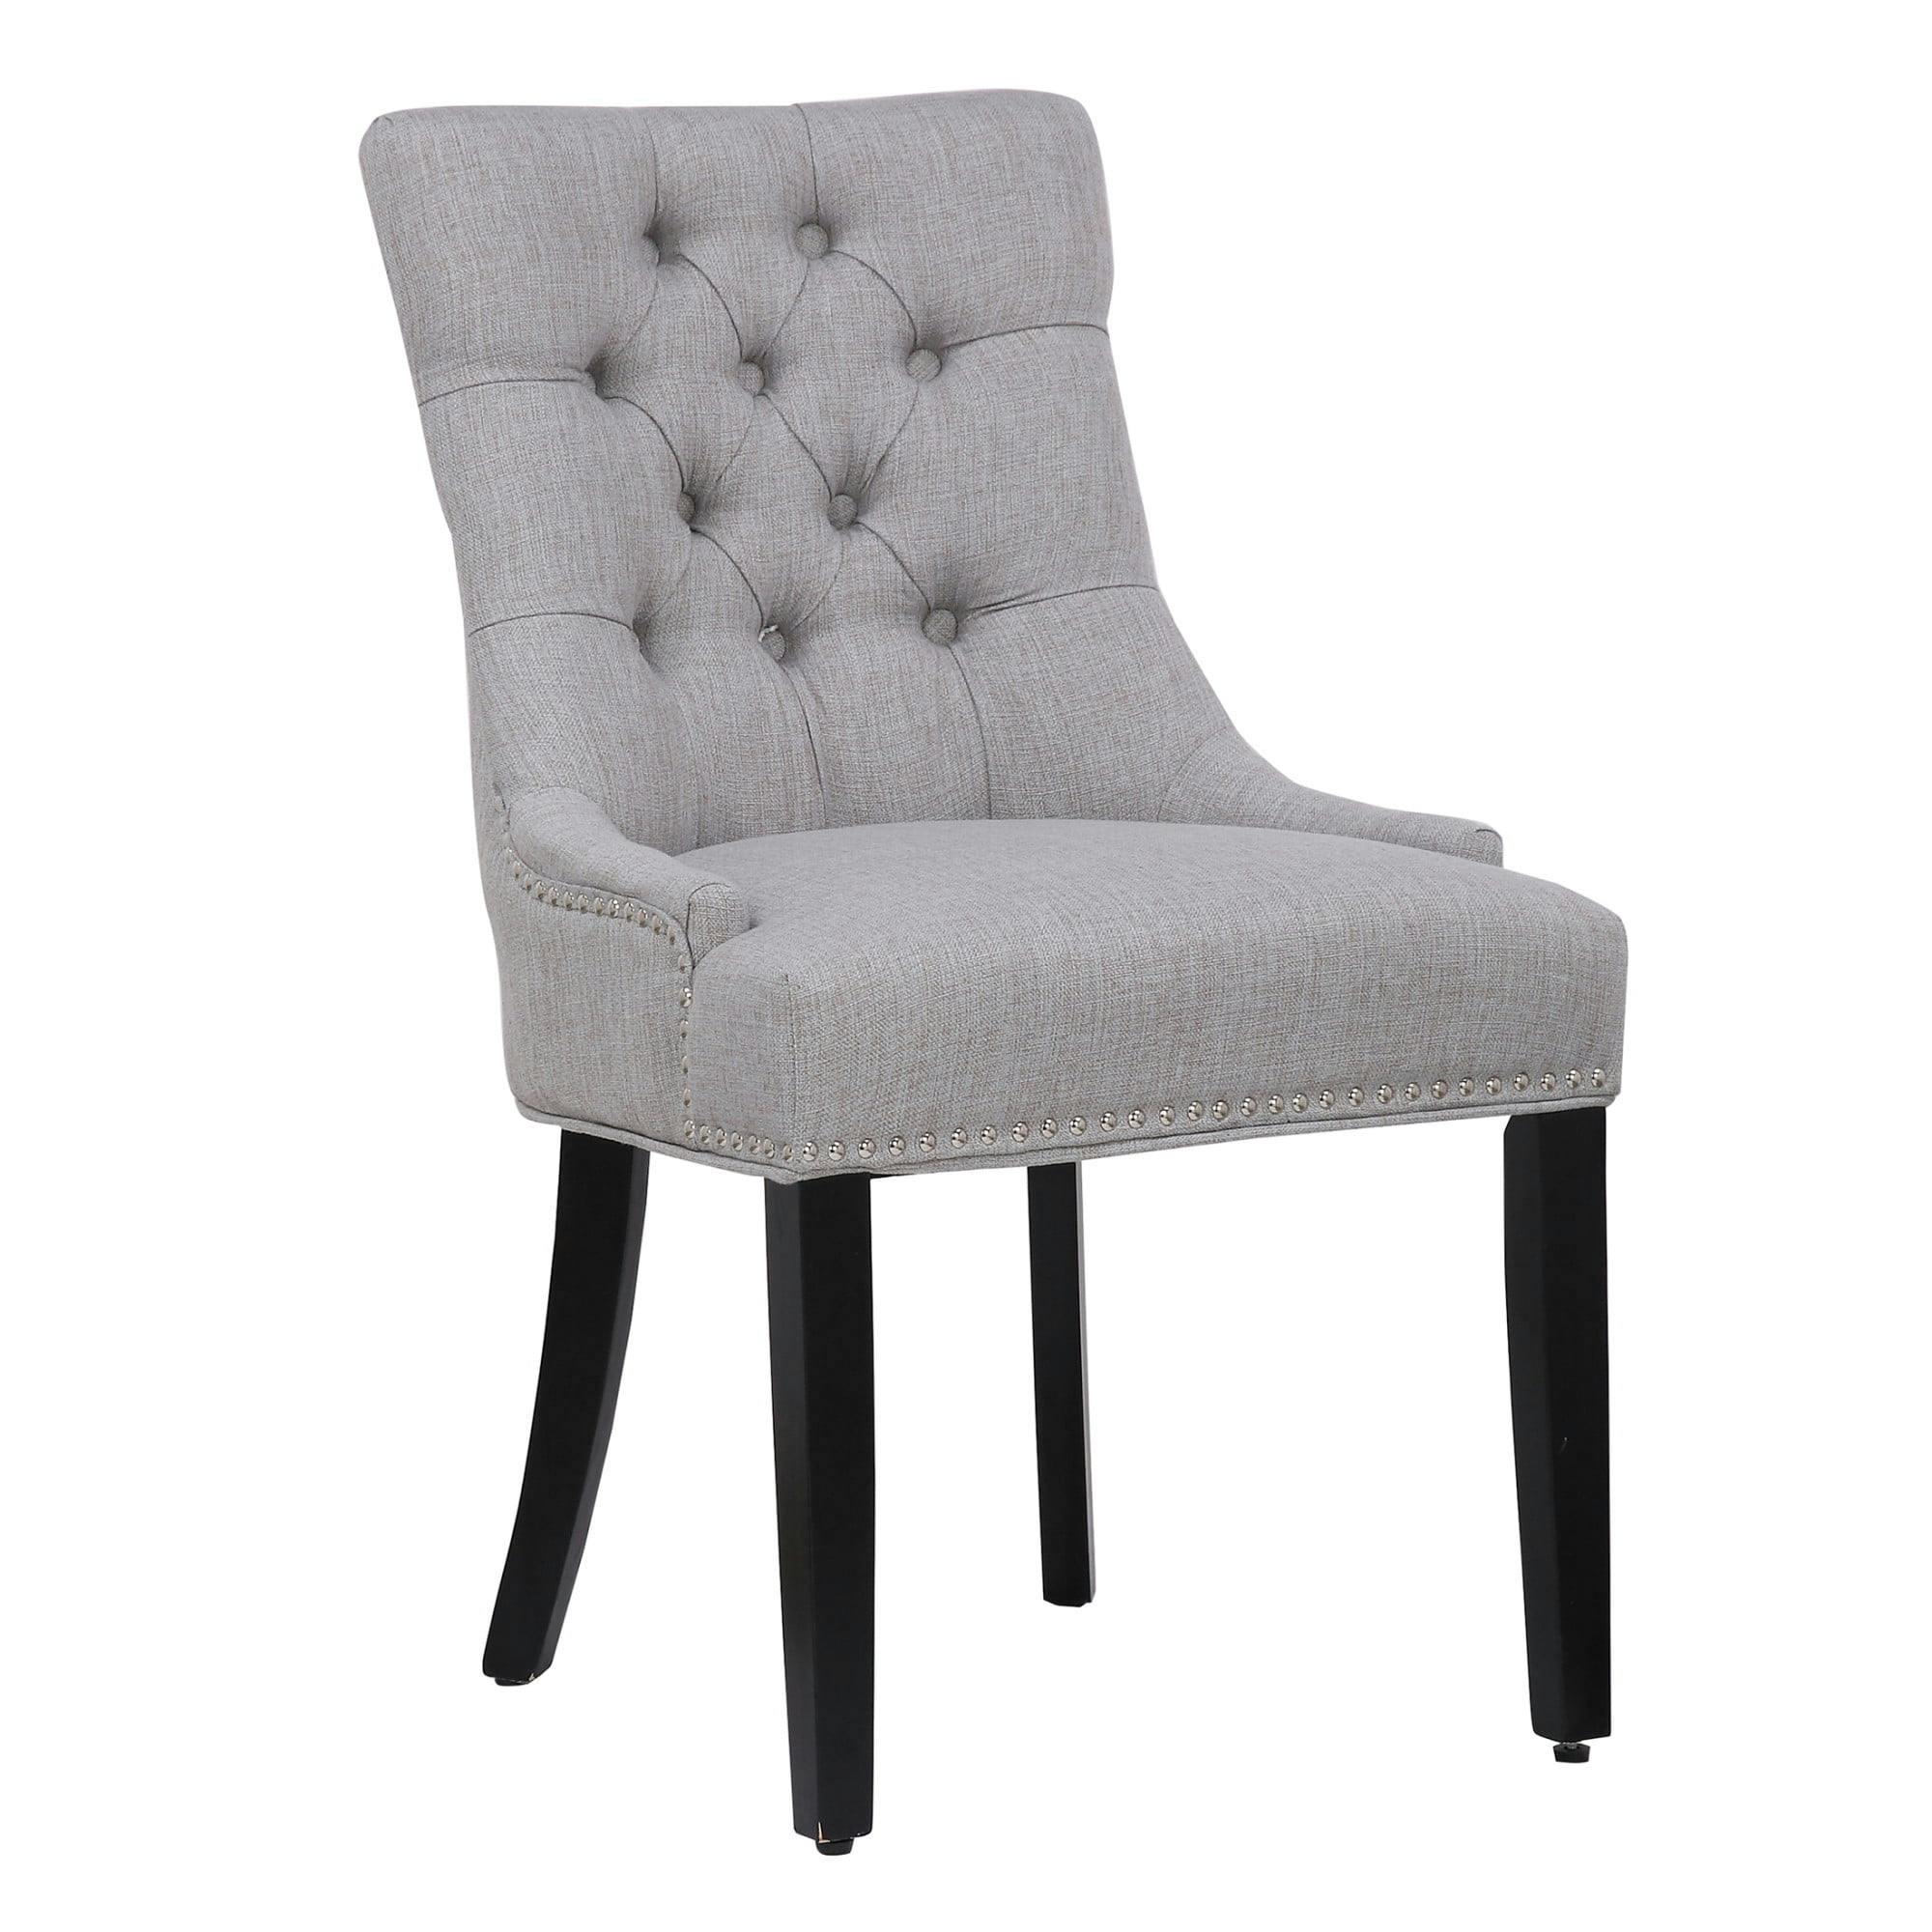 Elegant Gray Linen Upholstered High-Back Side Chair with Wood Accents